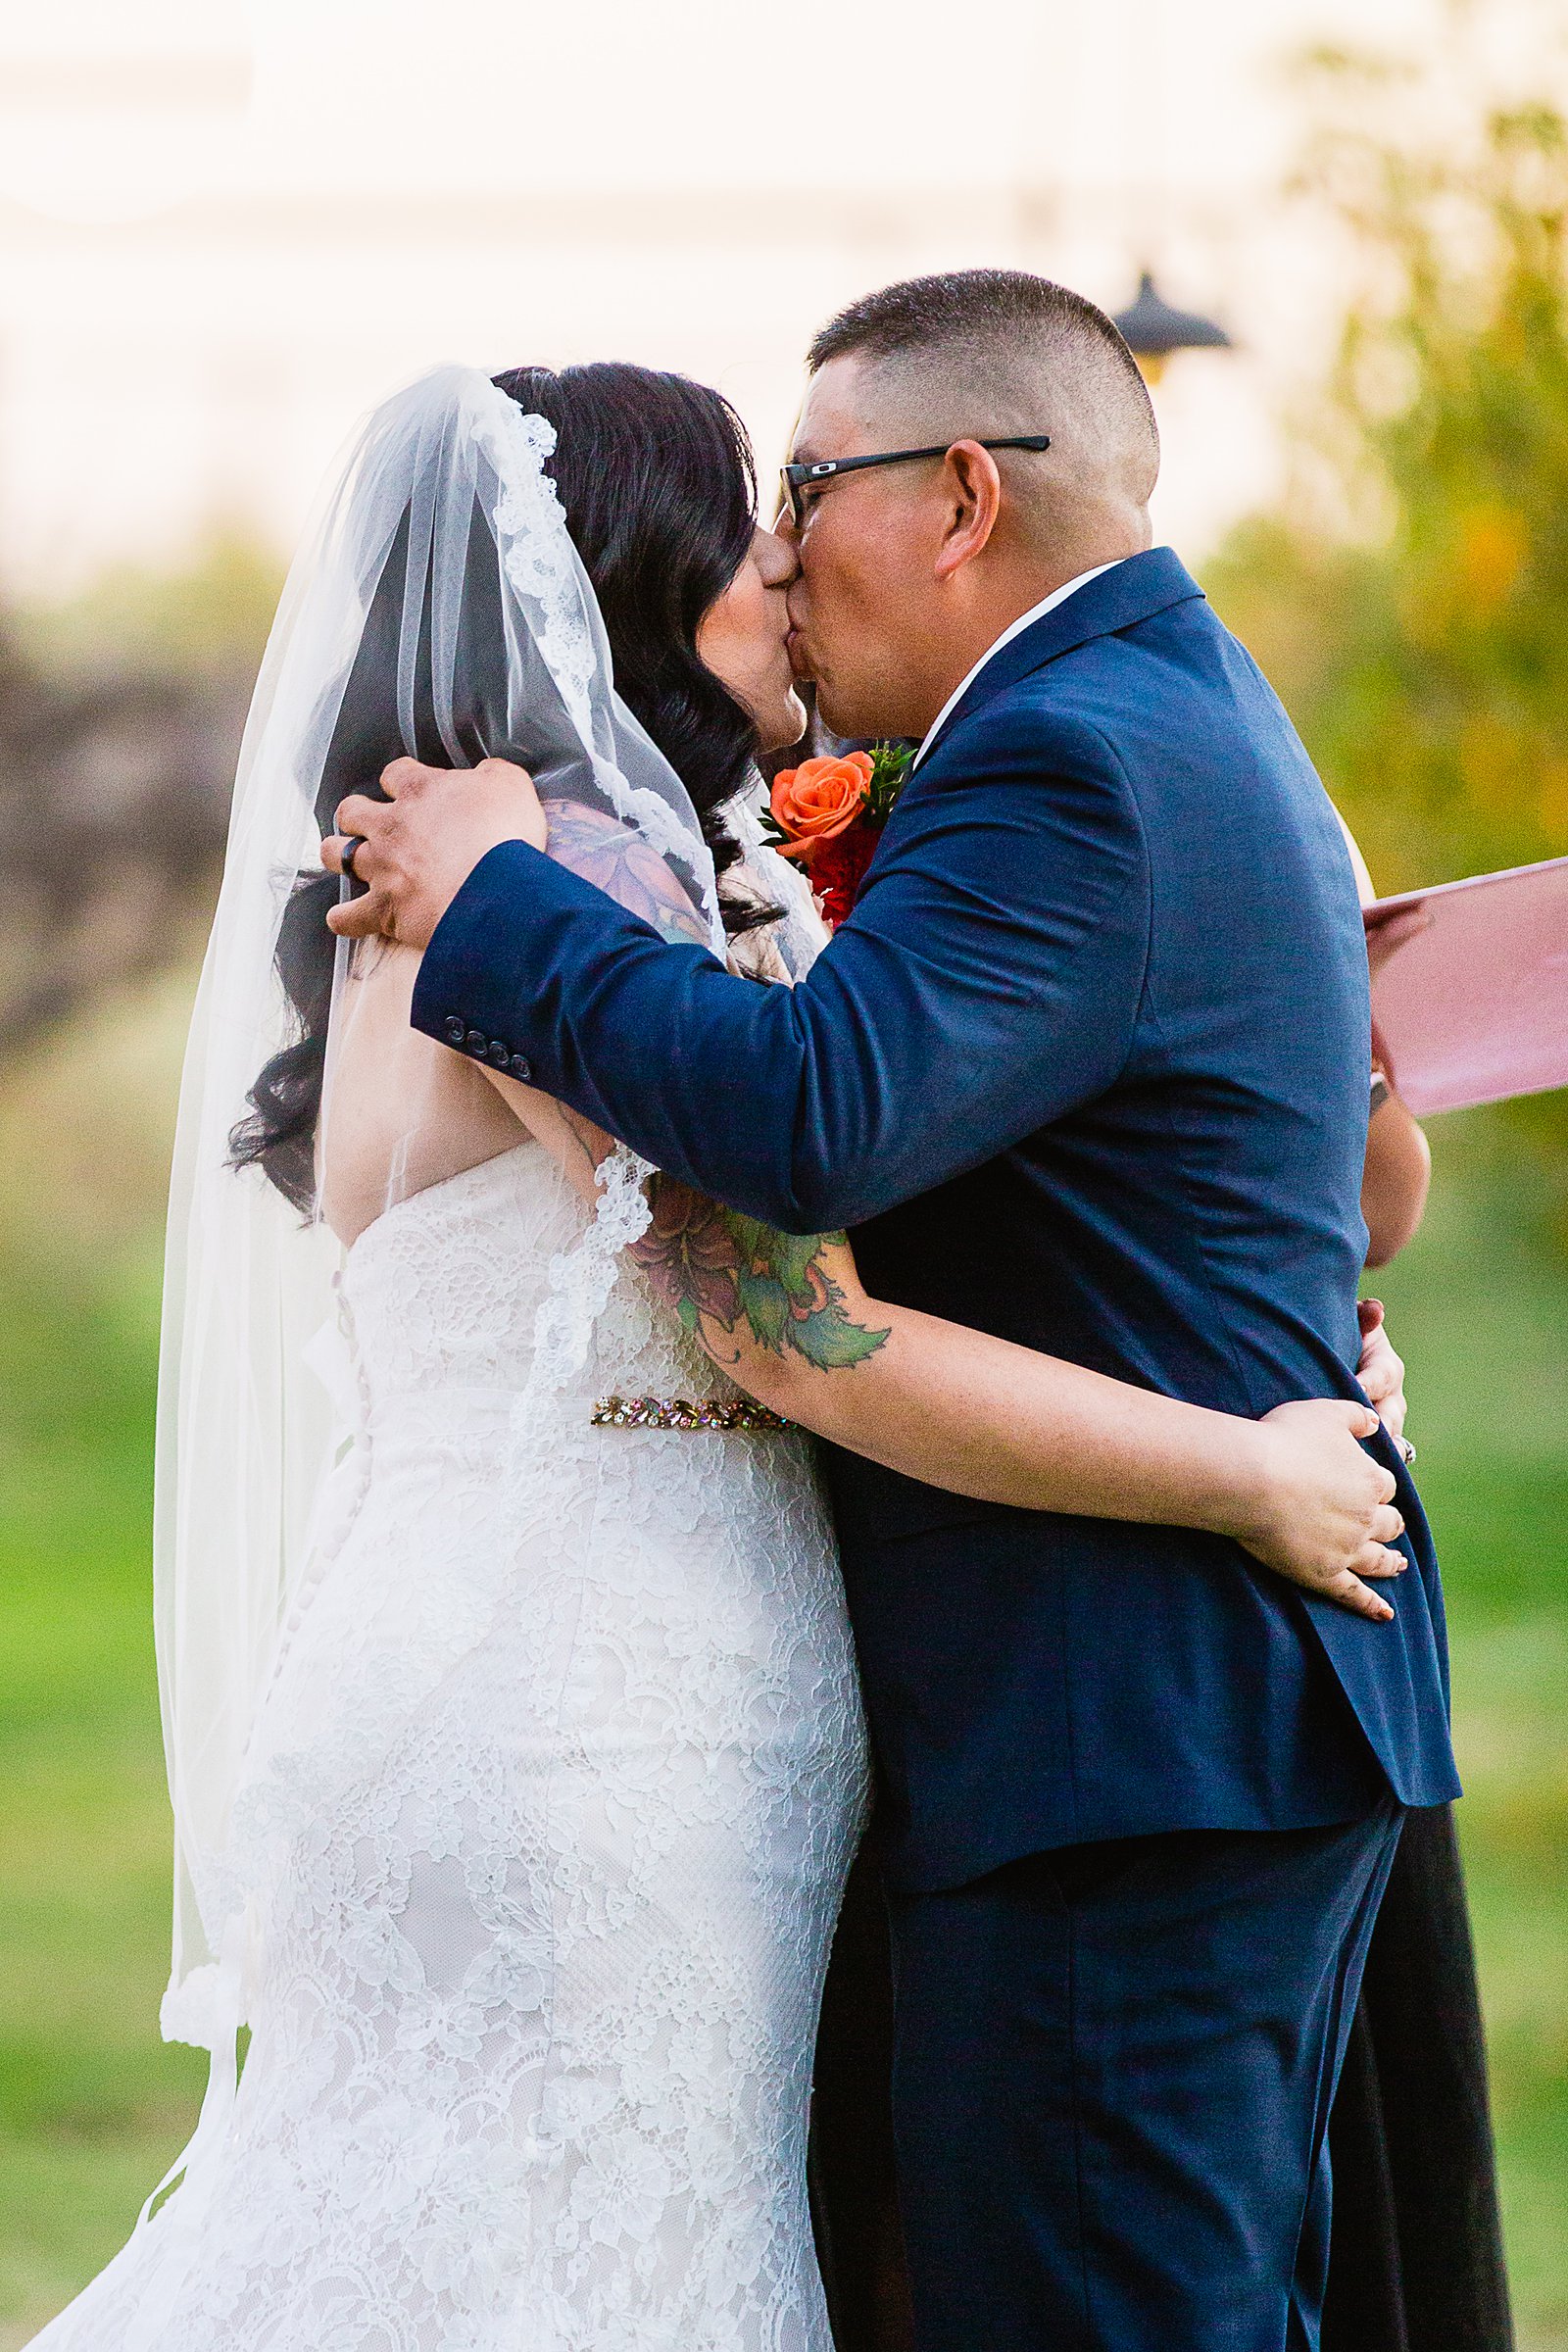 Bride and groom share their first kiss during their wedding ceremony at The Farmhouse at Schnepf Farms by Arizona wedding photographer PMA Photography.